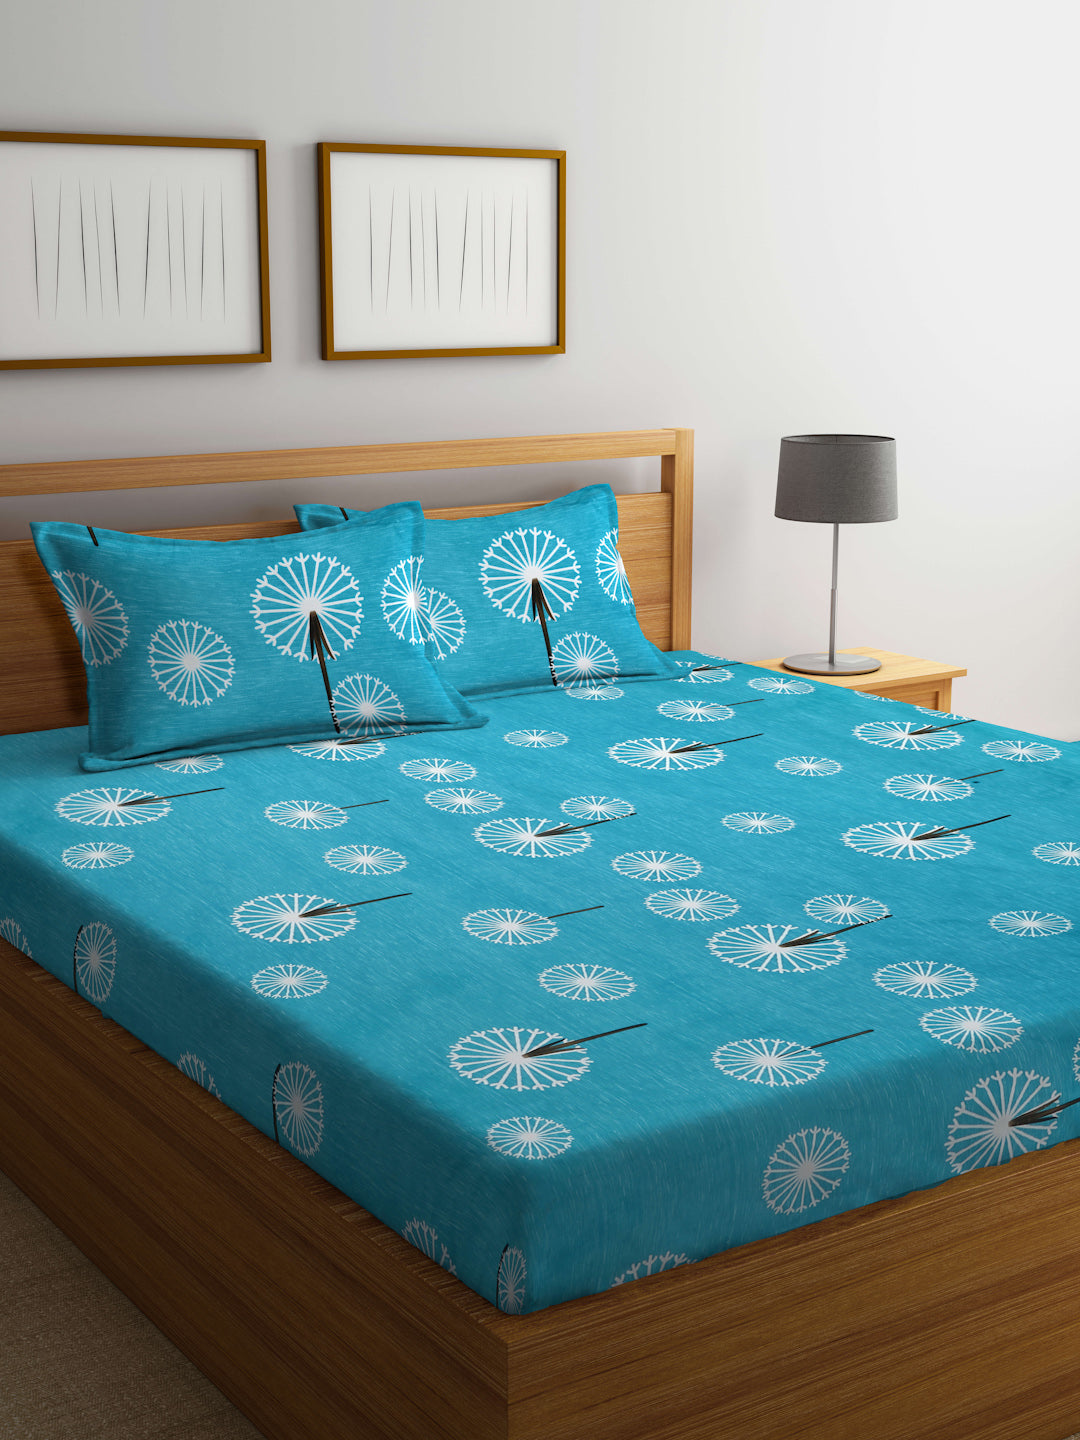 Arrabi Teal Indian TC Cotton Blend Super King Size Bedsheet with 2 Pillow Covers (270 X 260 cm)